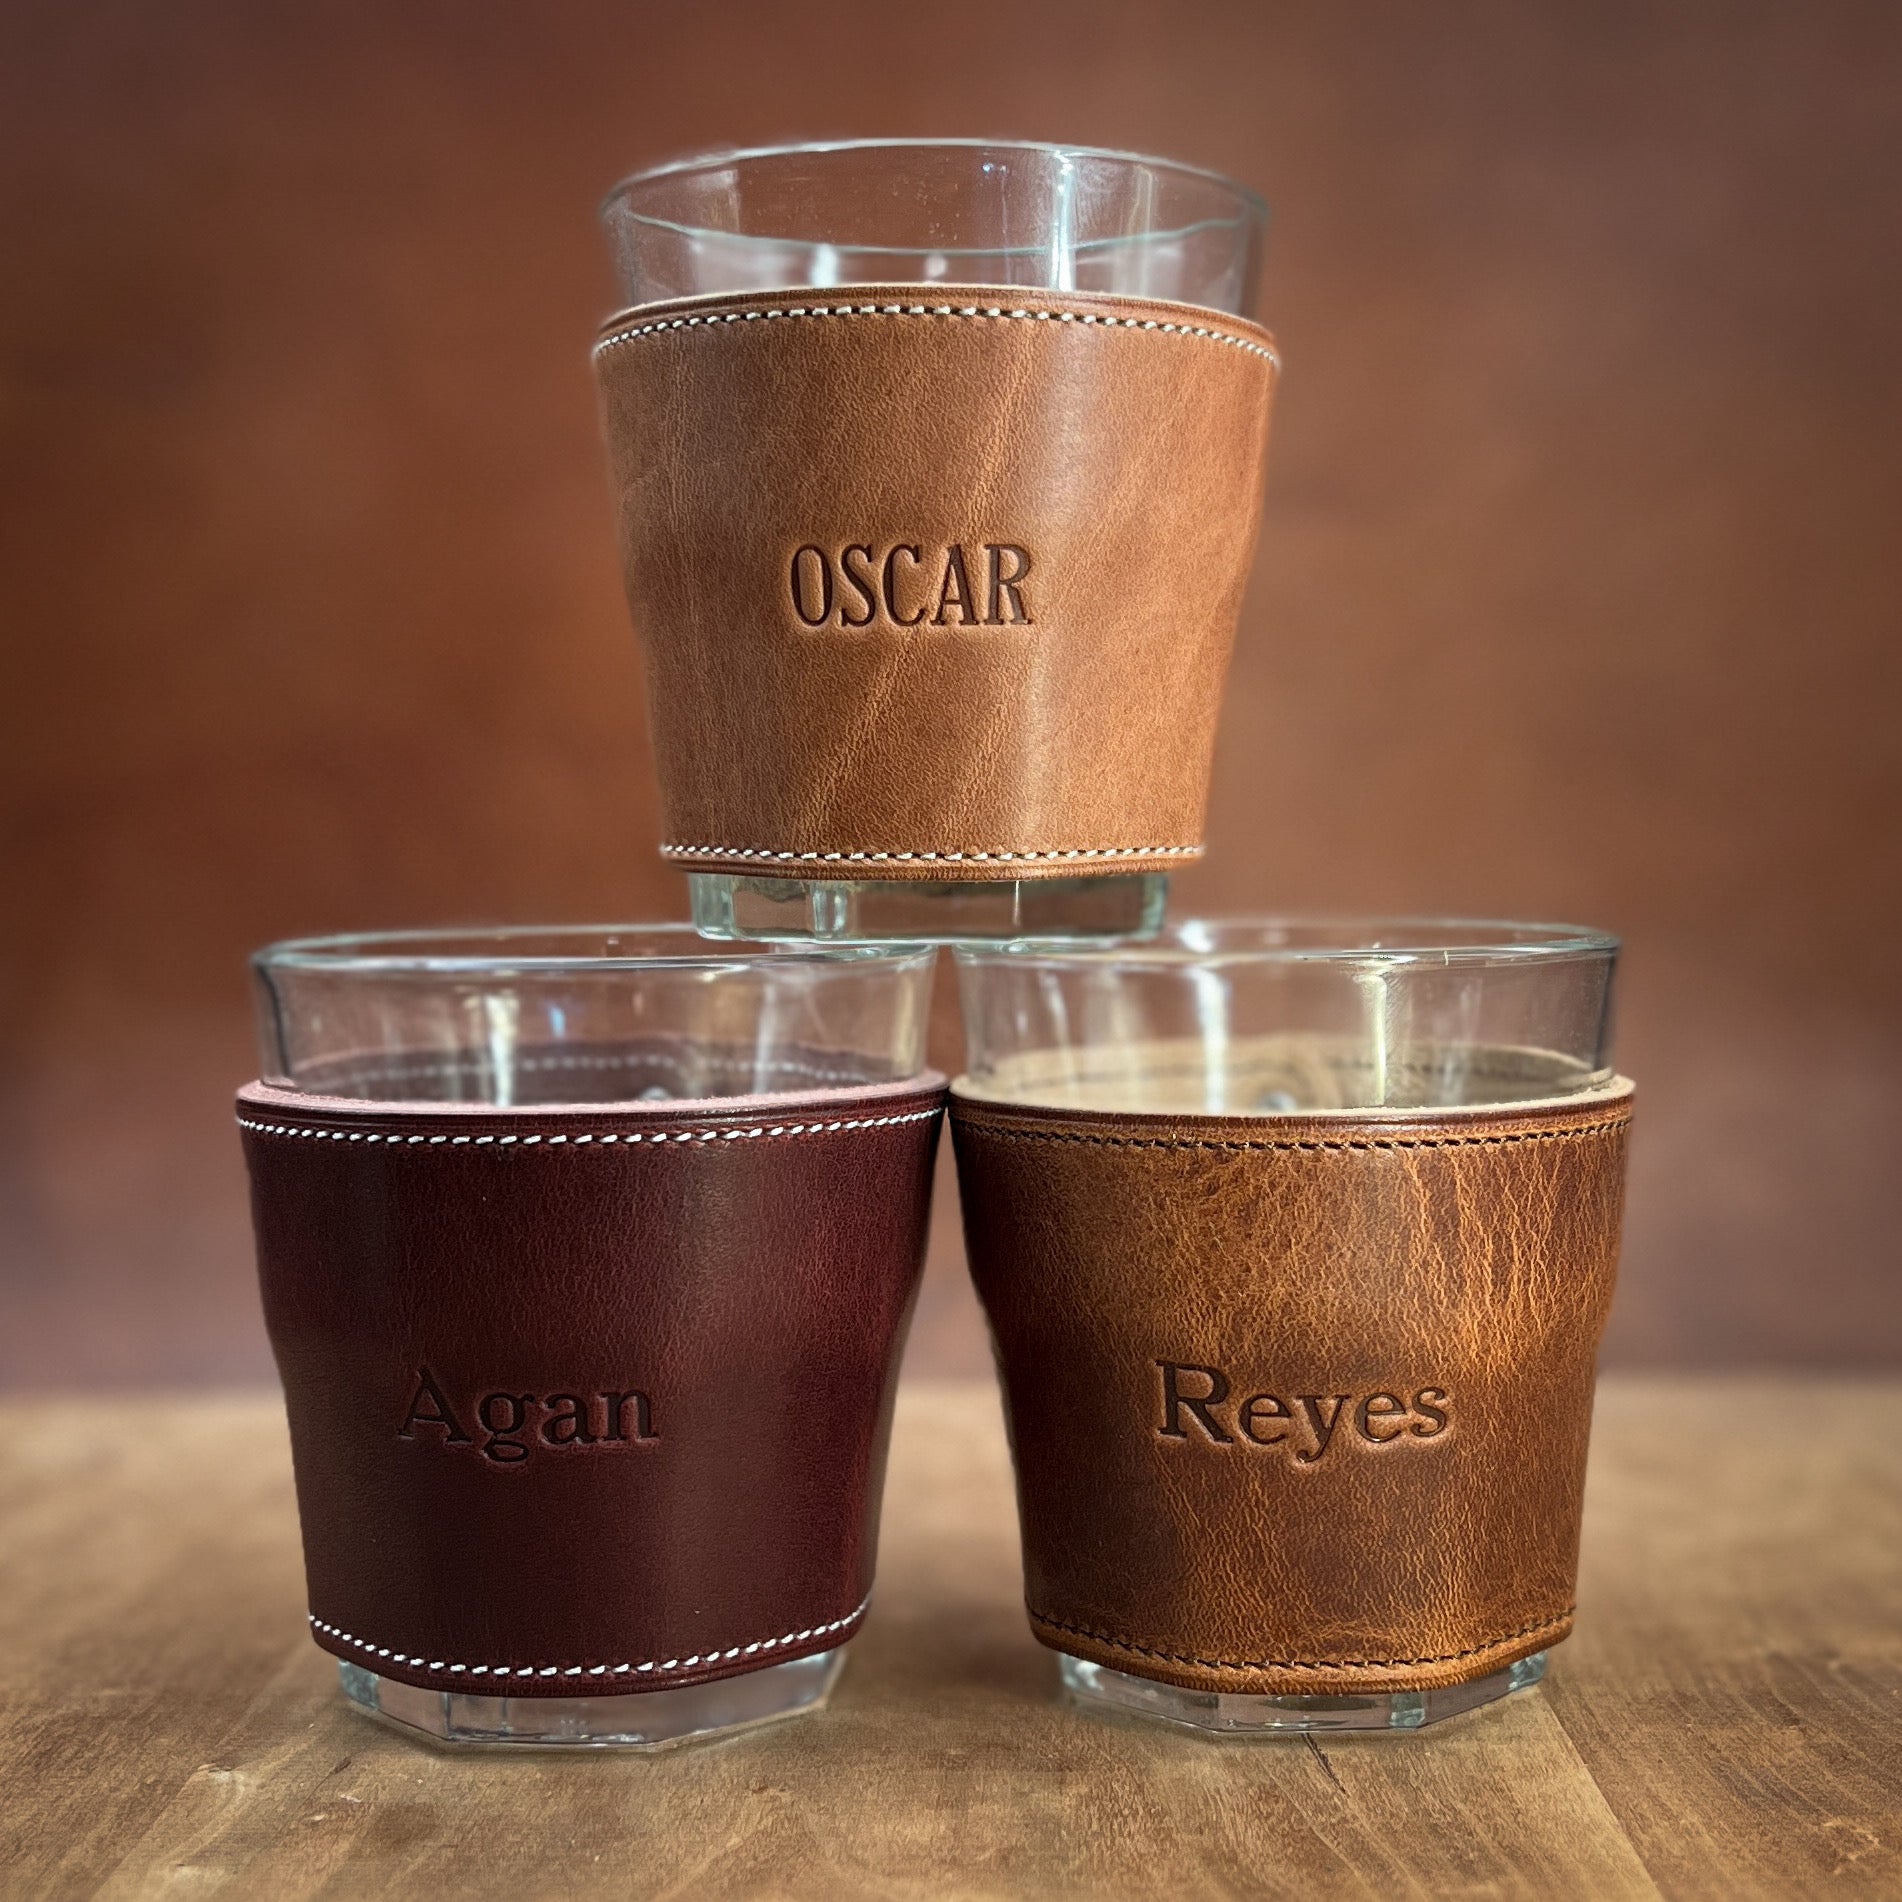 Personalized bourbon glasses in london red, natural dublin and english tan horween leather